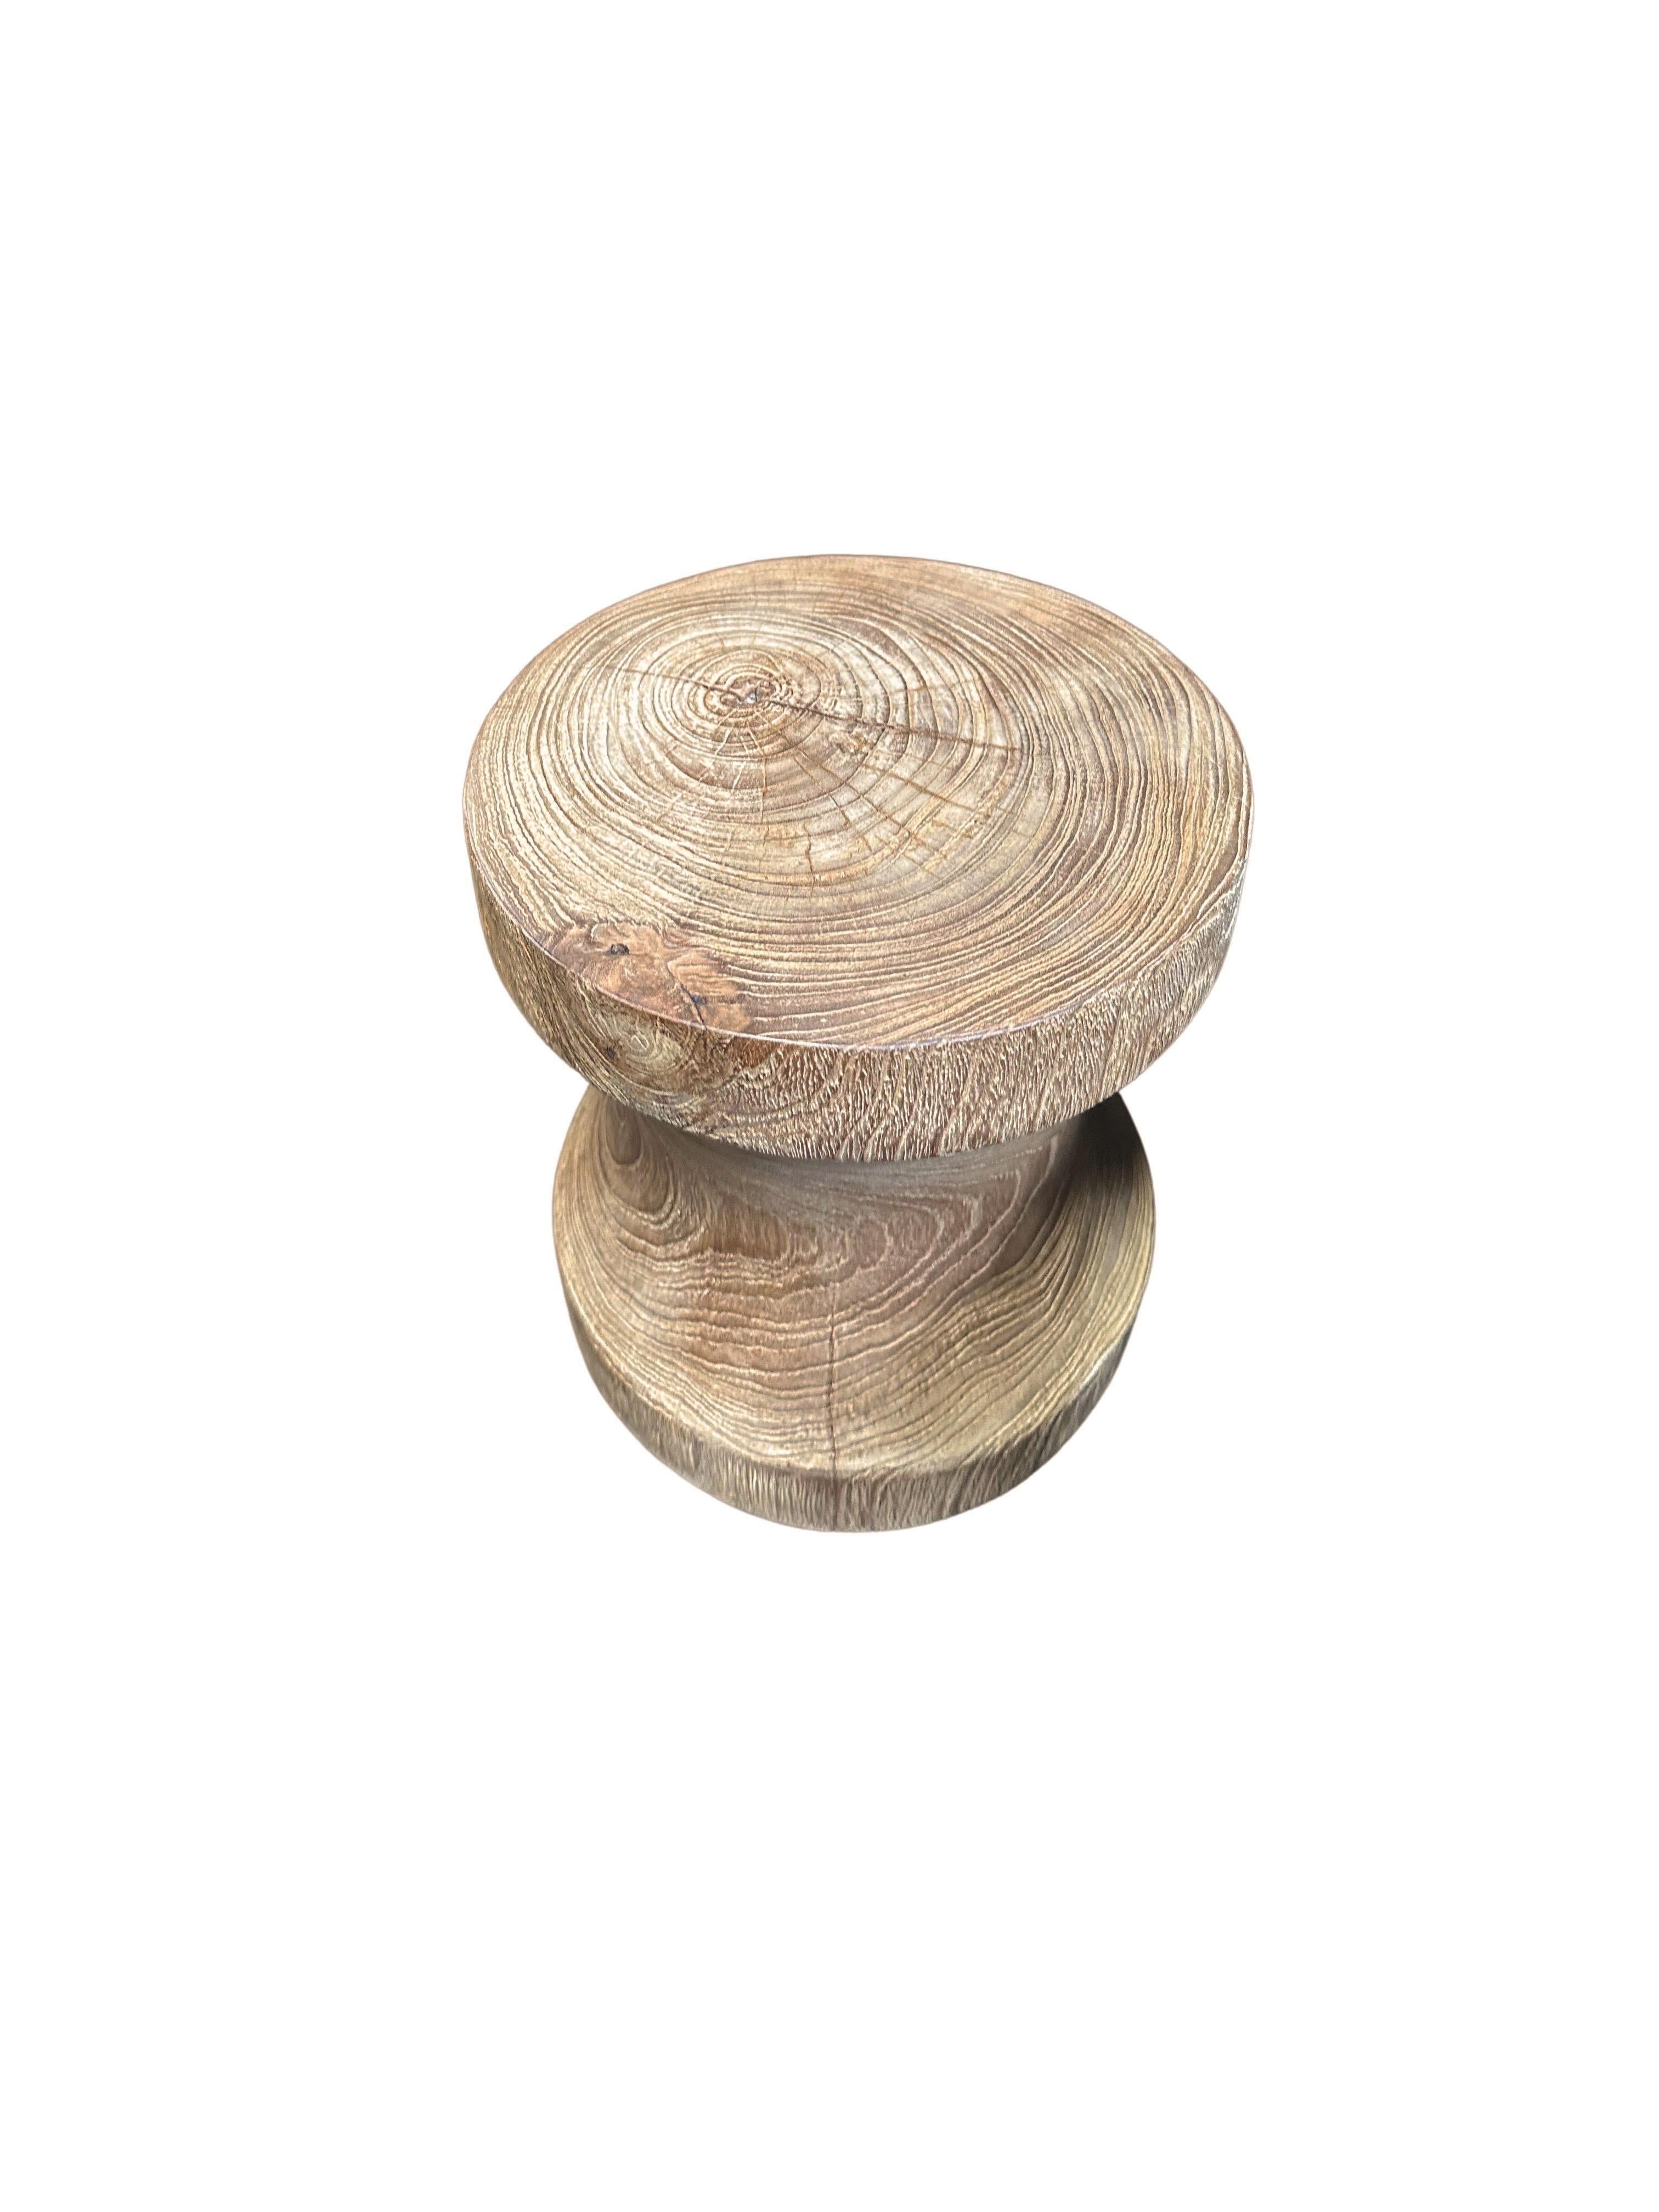 Organic Modern Sculptural Side Table Crafted from Teak Wood, With Stunning Textures For Sale